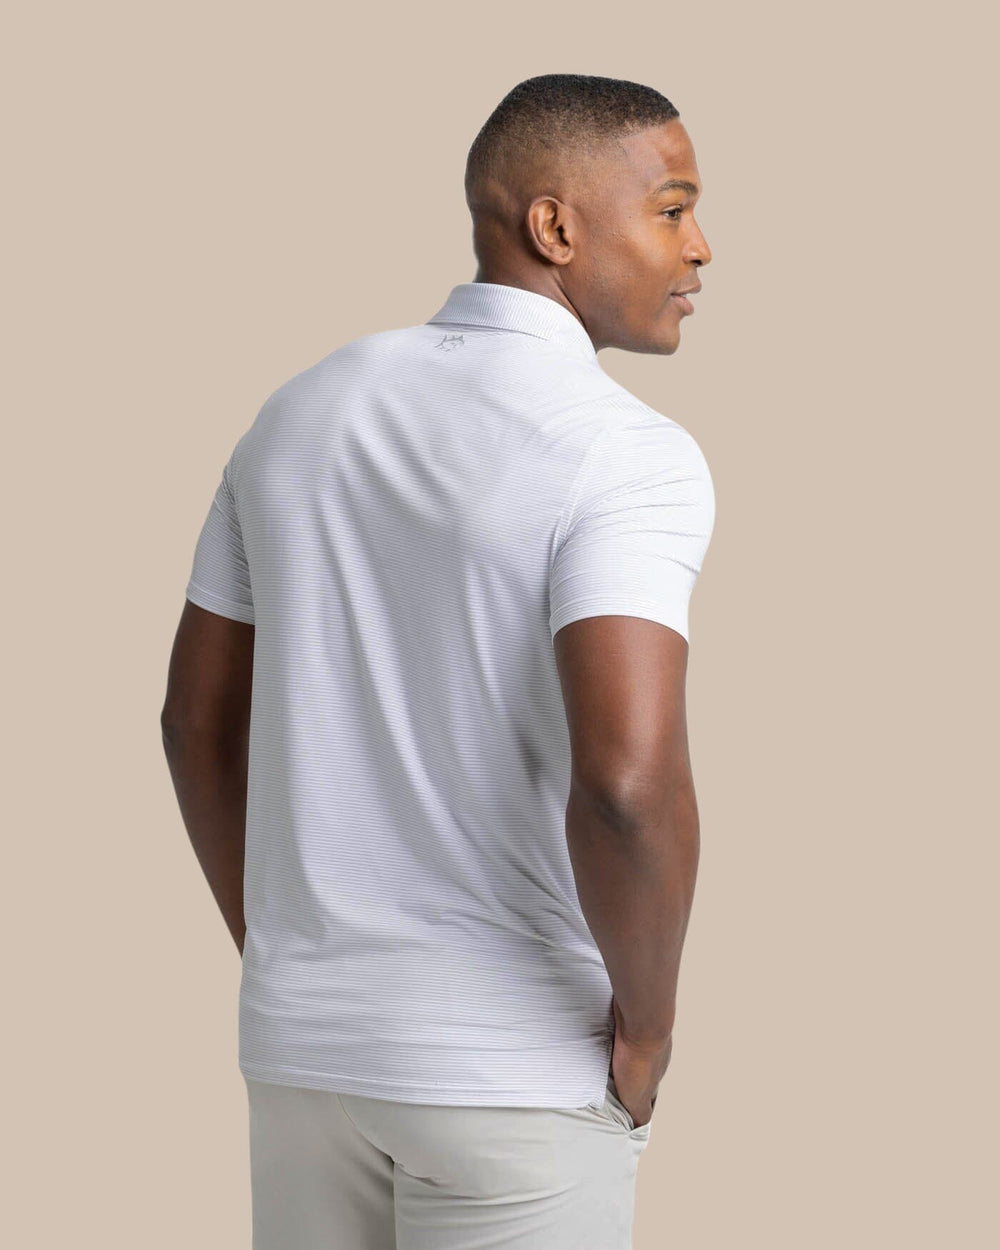 The back view of the Southern Tide brrr-eeze Meadowbrook Stripe Polo by Southern Tide - Platinum Grey